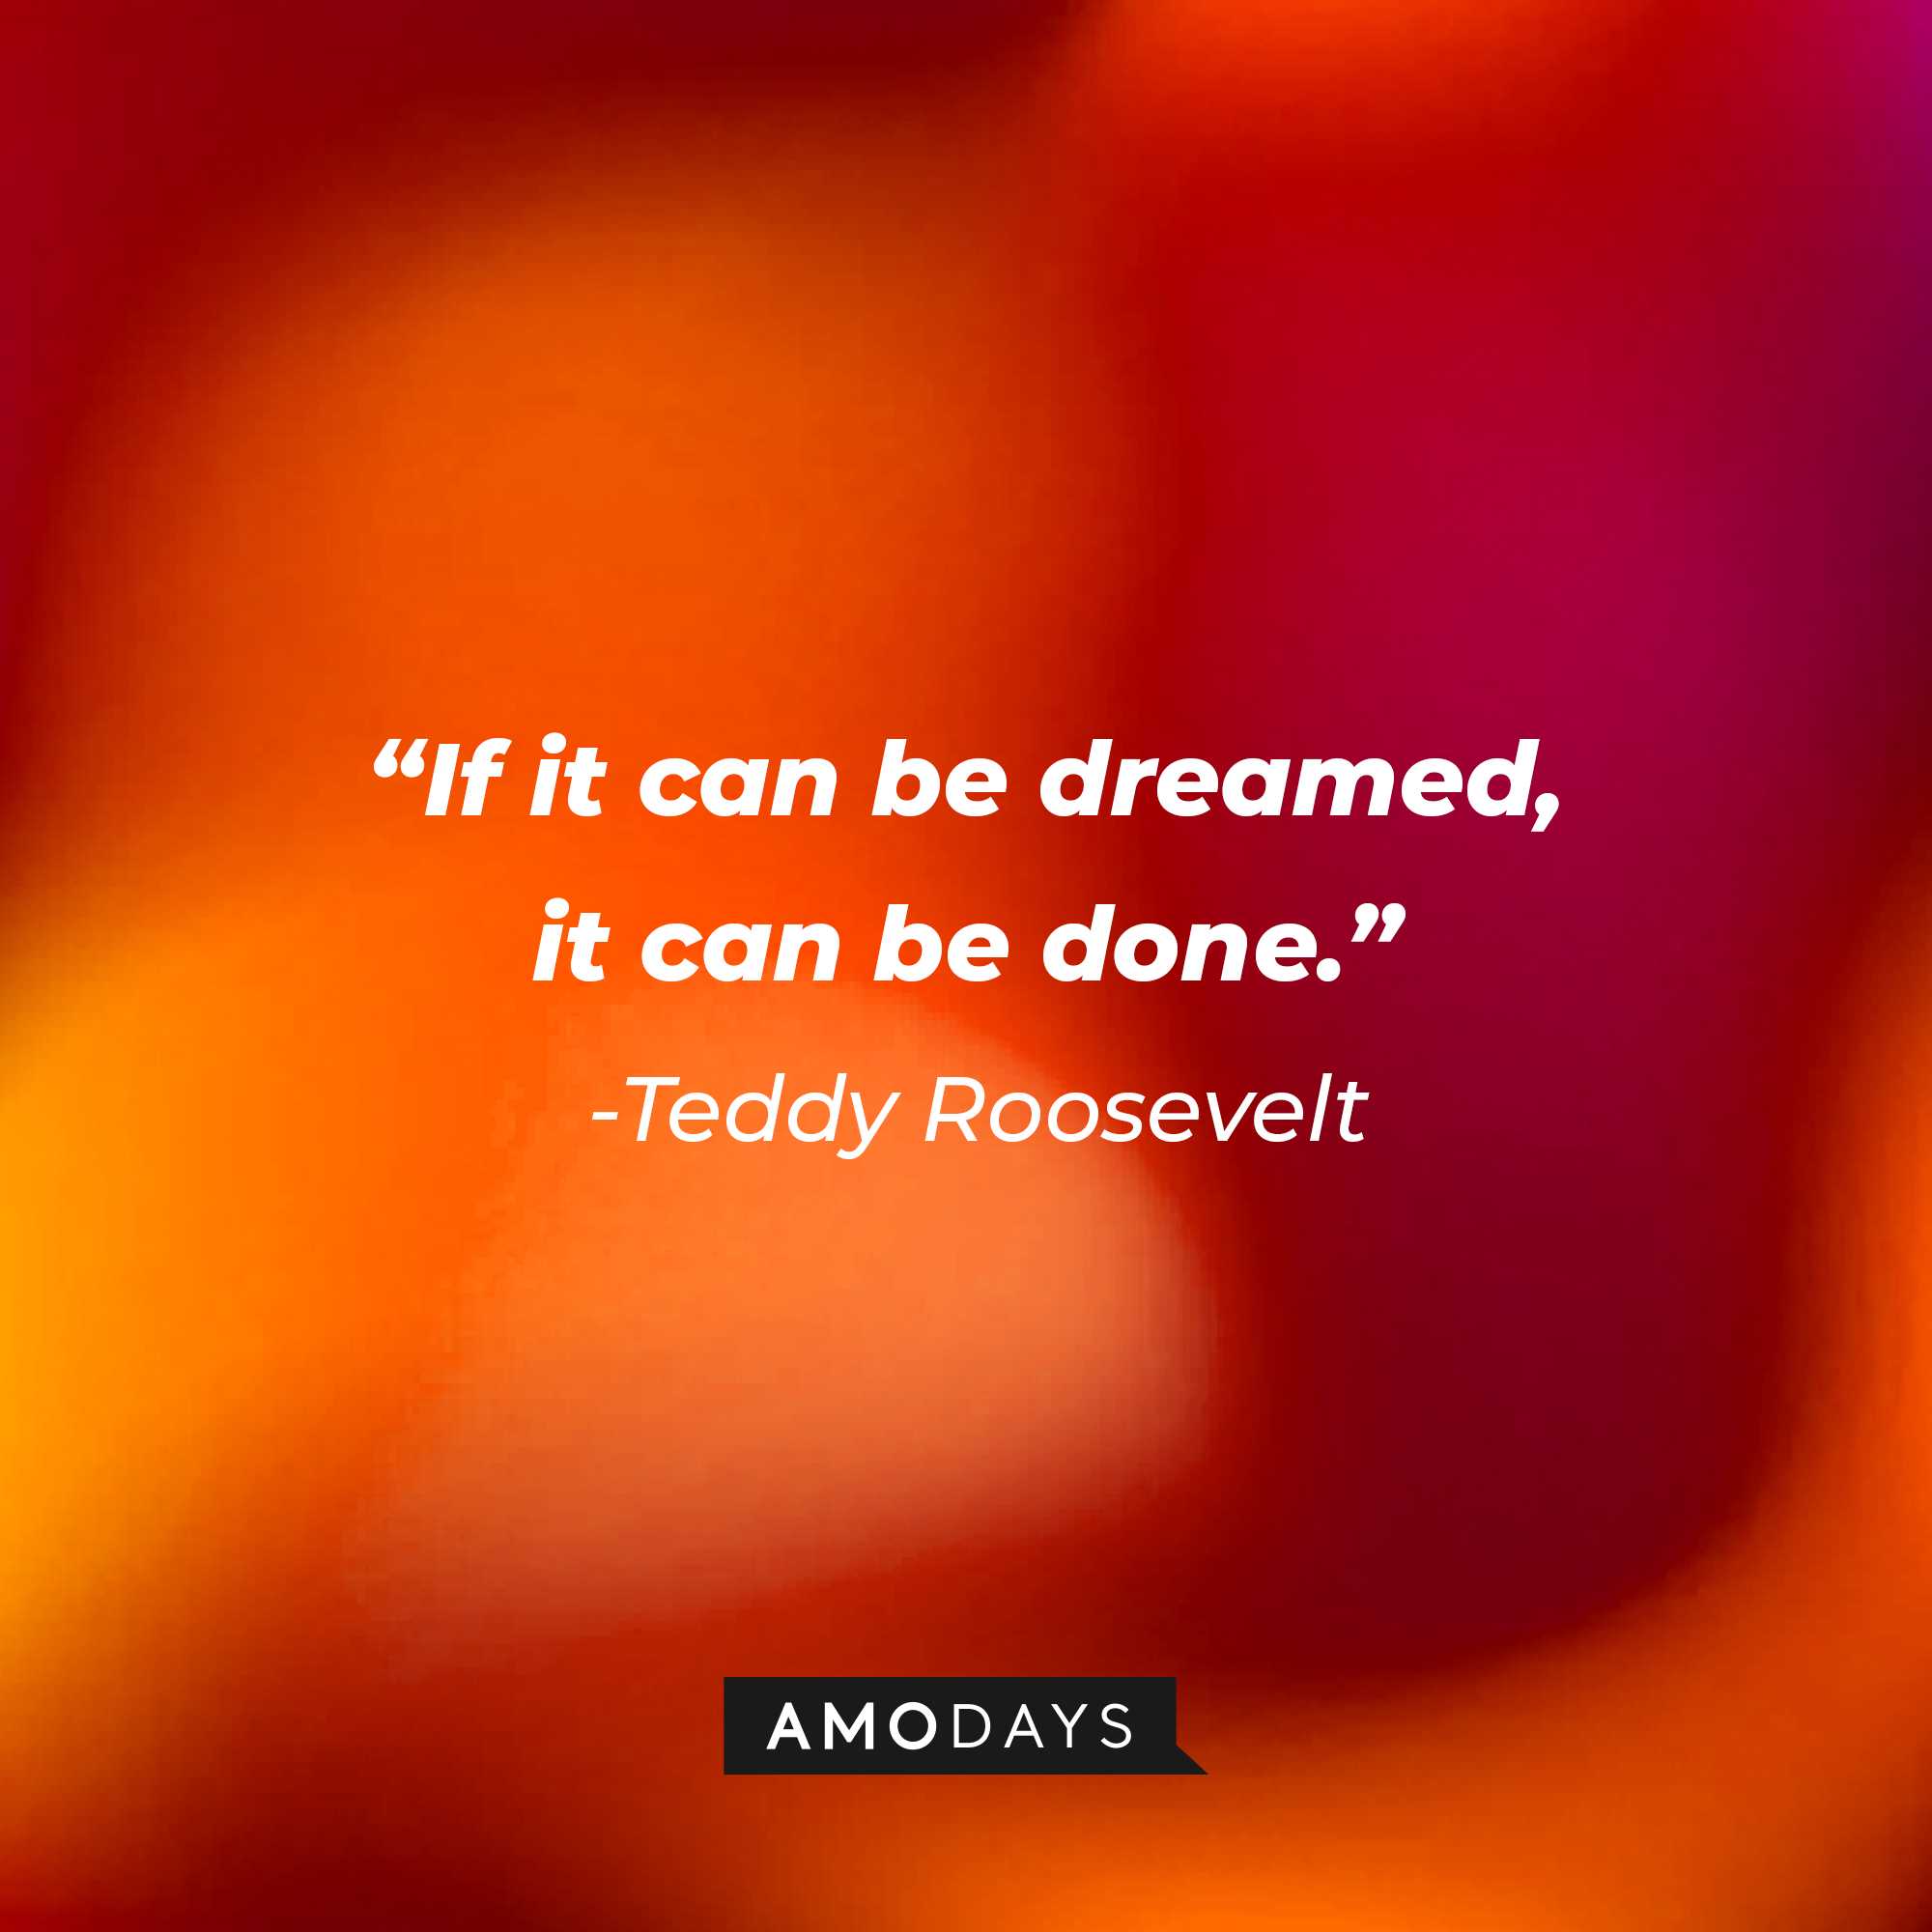 Teddy Roosevelt's quote: “If it can be dreamed, it can be done.” | Source: Amodays